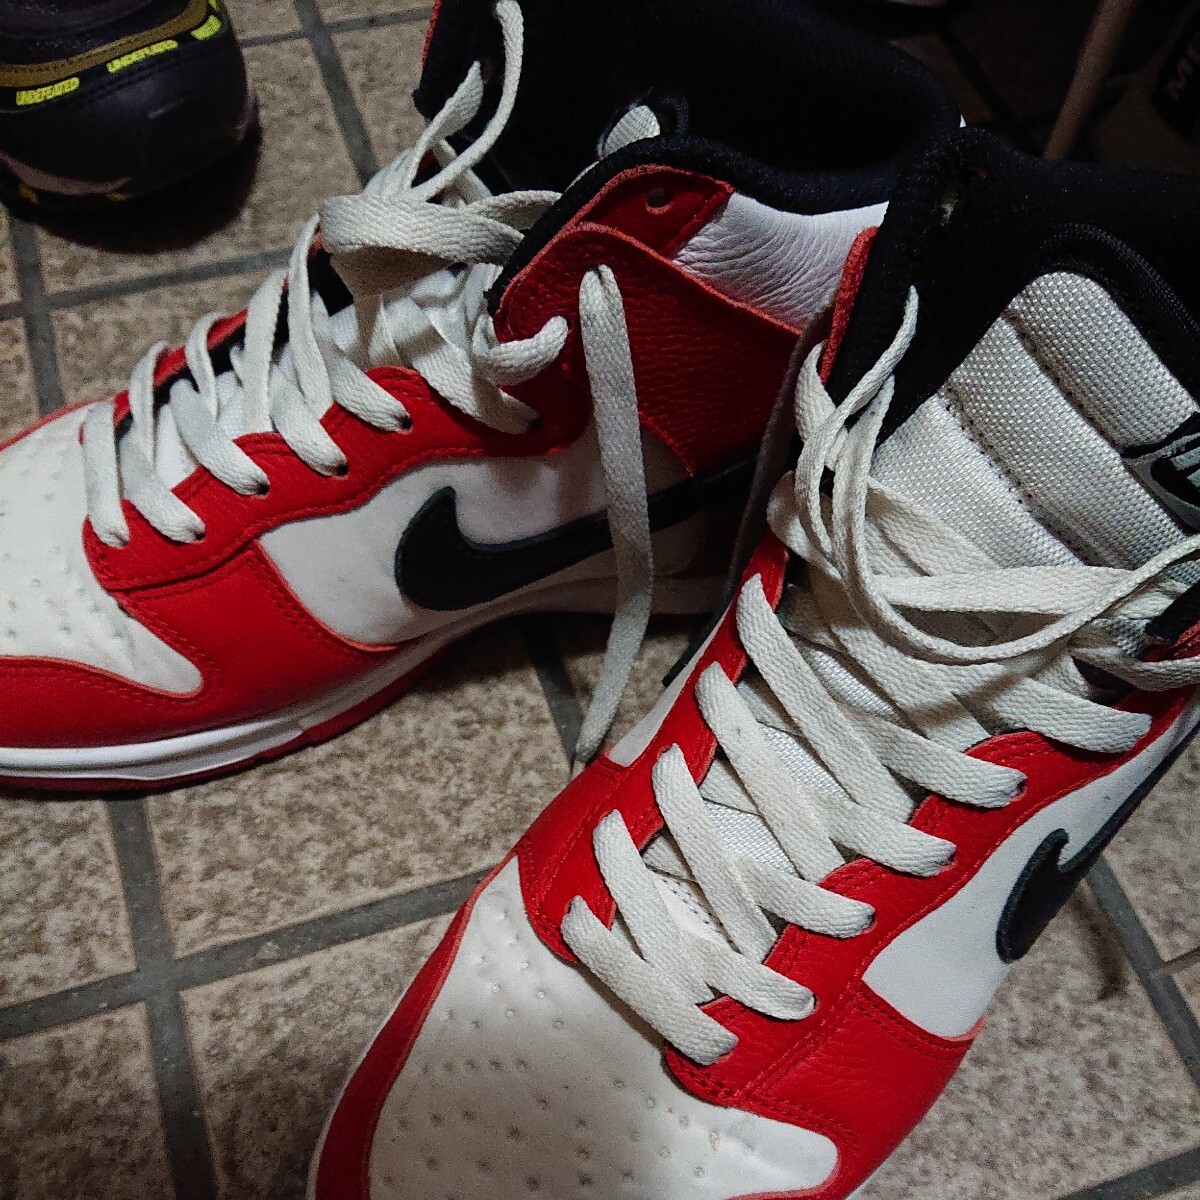 NIKE スニーカー dunk high by you chicago風の画像1